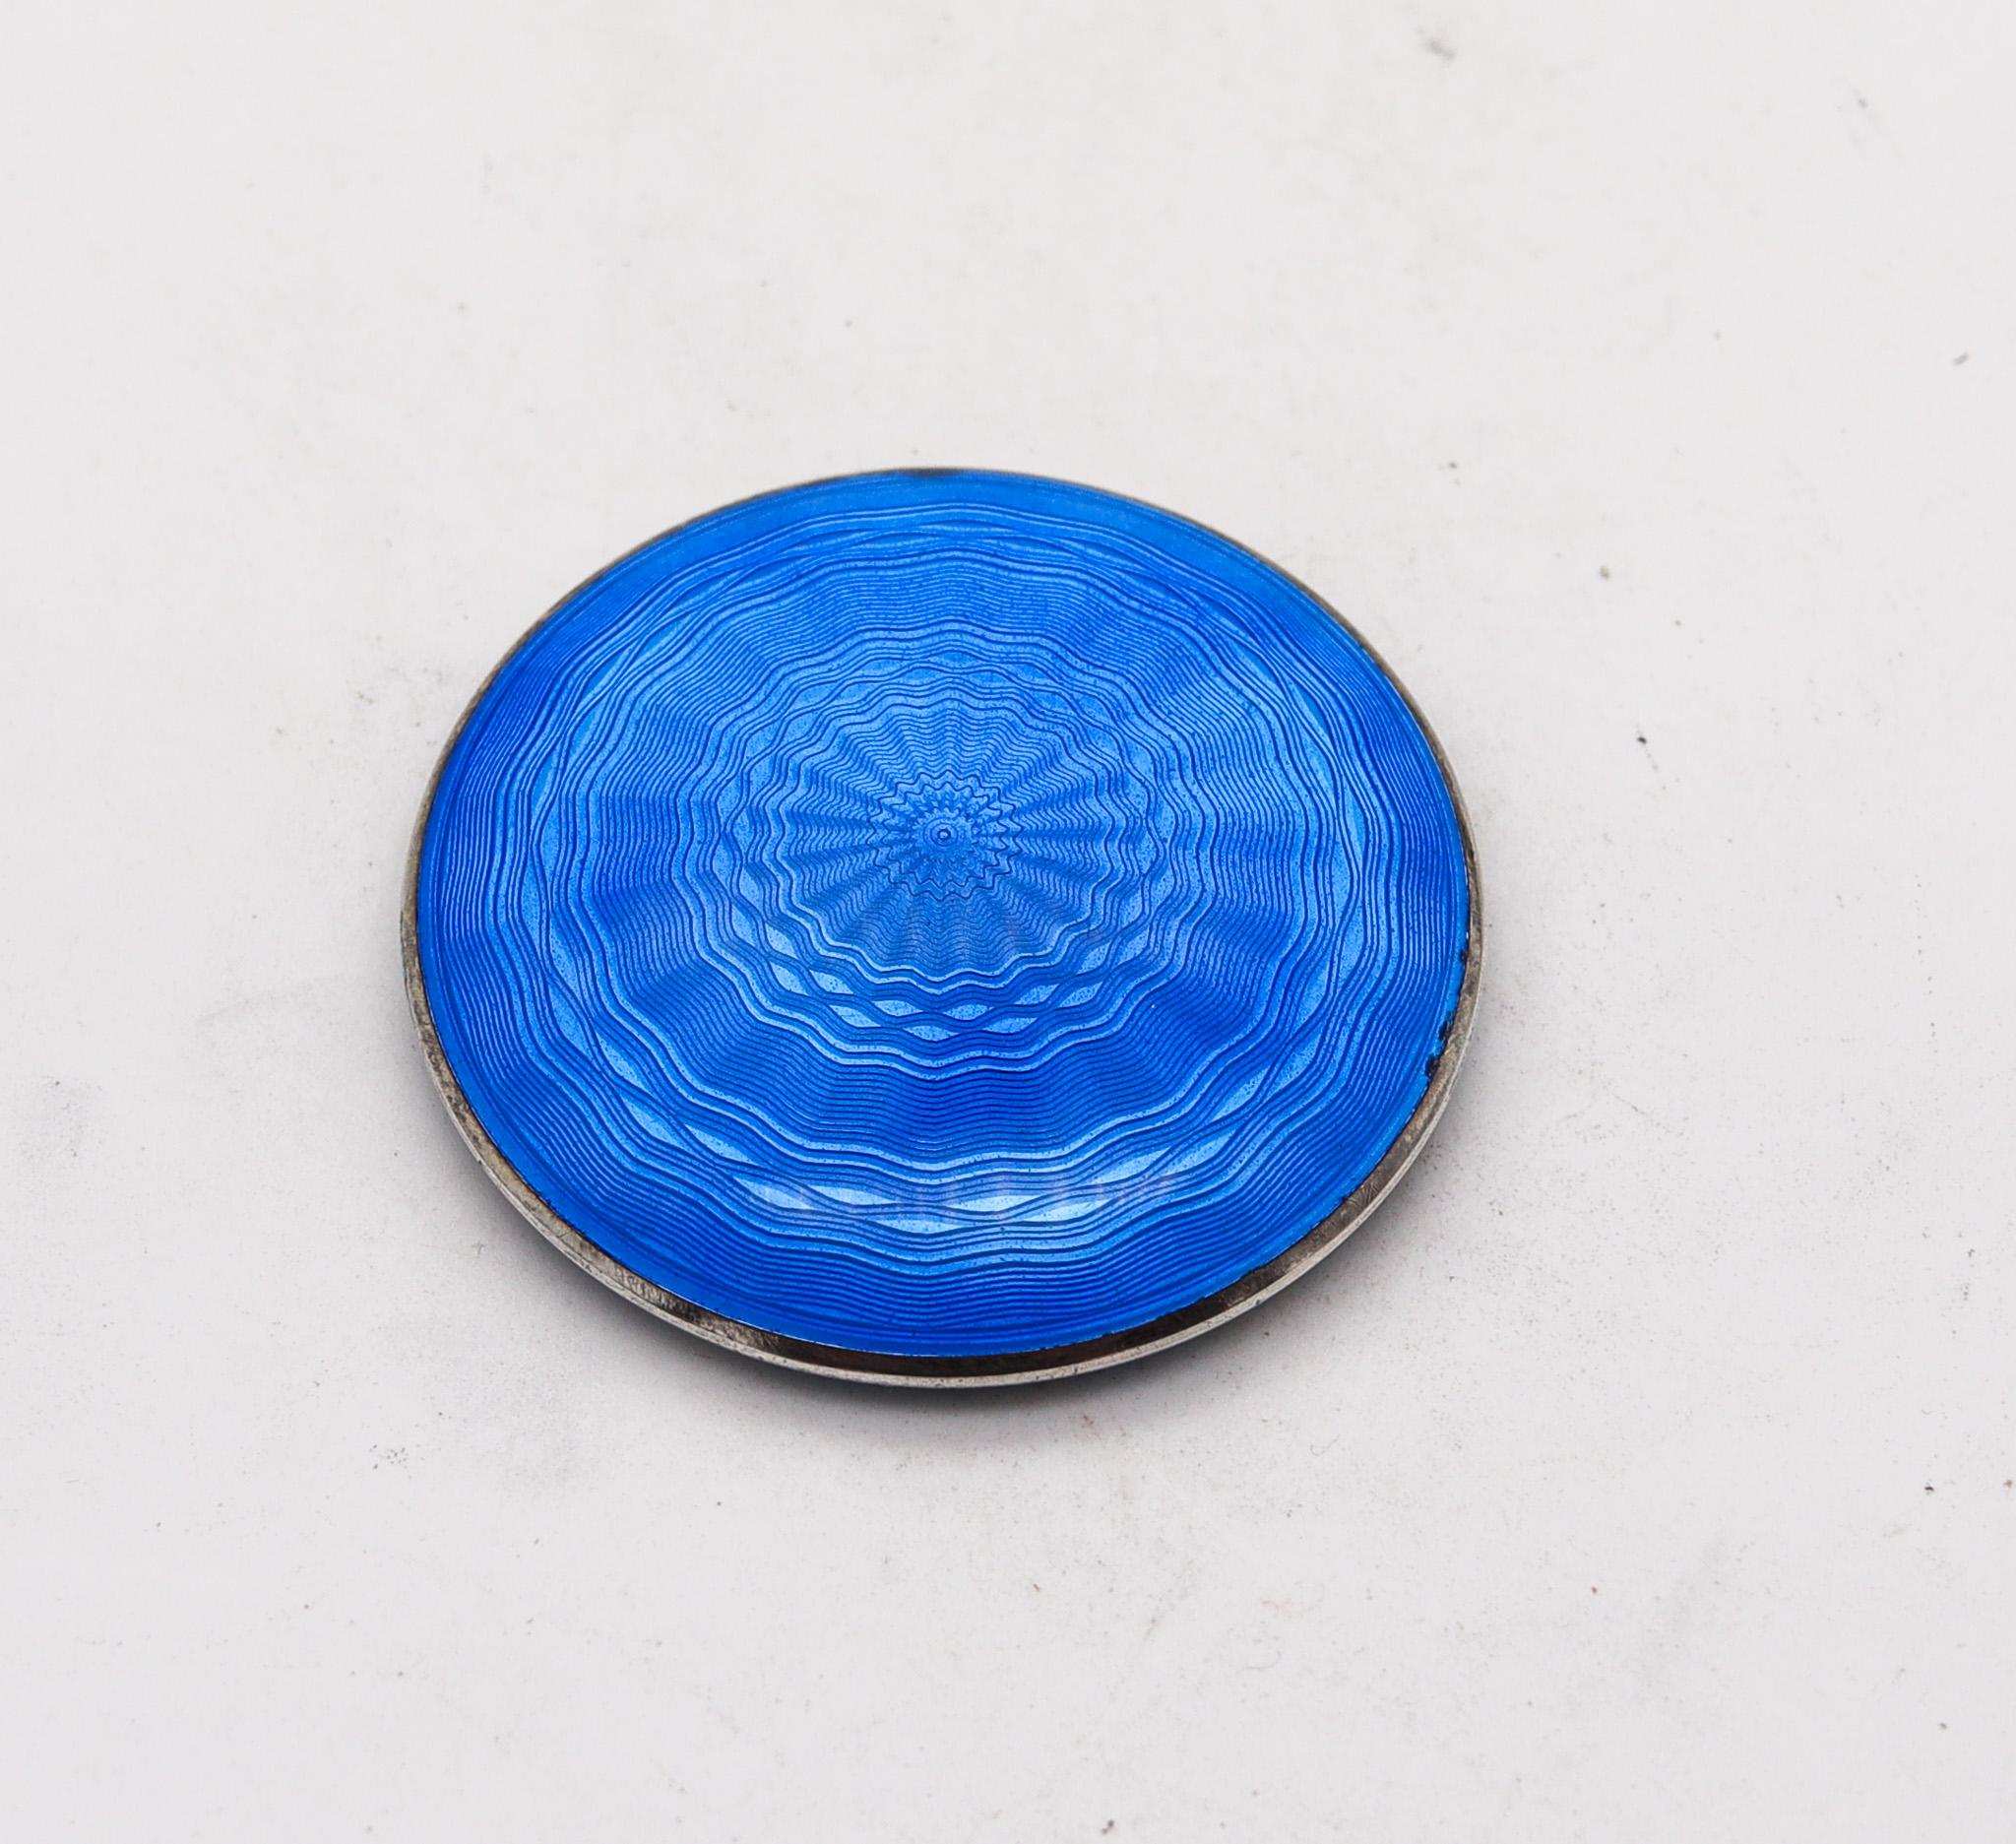 Austria 1922 Art Deco Polychrome And Blue Enamel Round Box .925 Sterling Silver For Sale 1